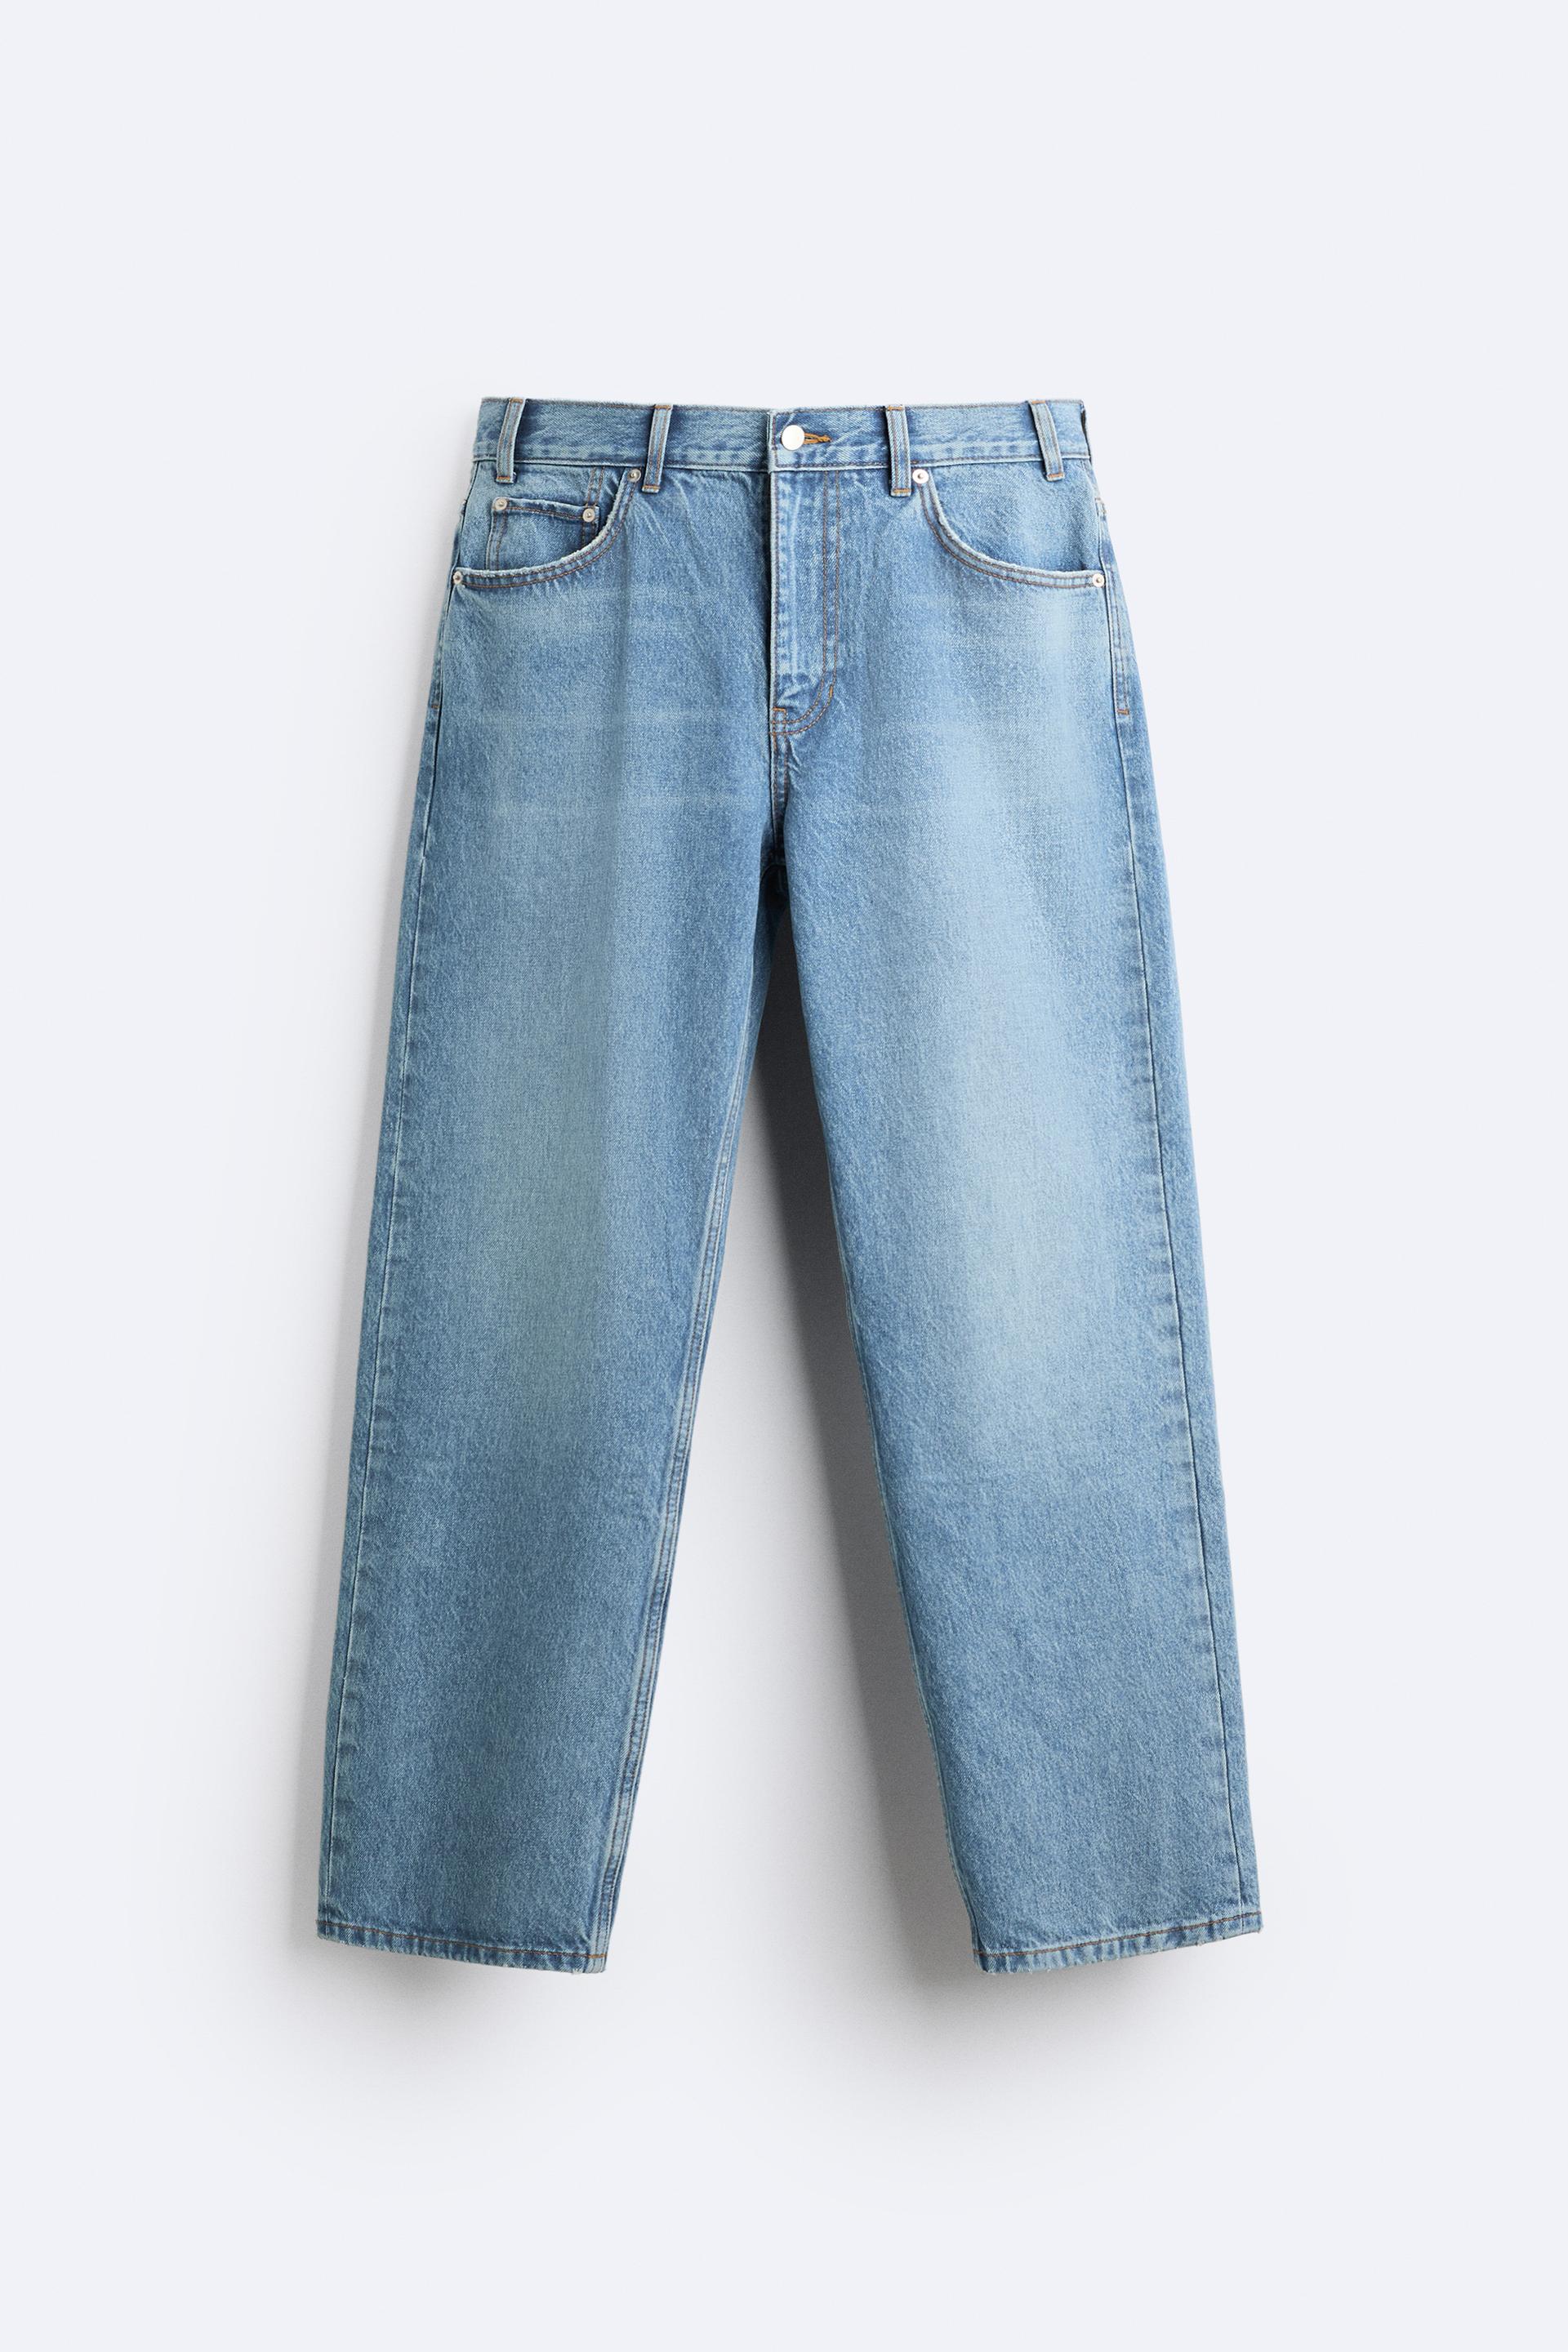 Zara High Rise Mom Jeans In Mid Blue Size M Colour BNWT RRP £29.99